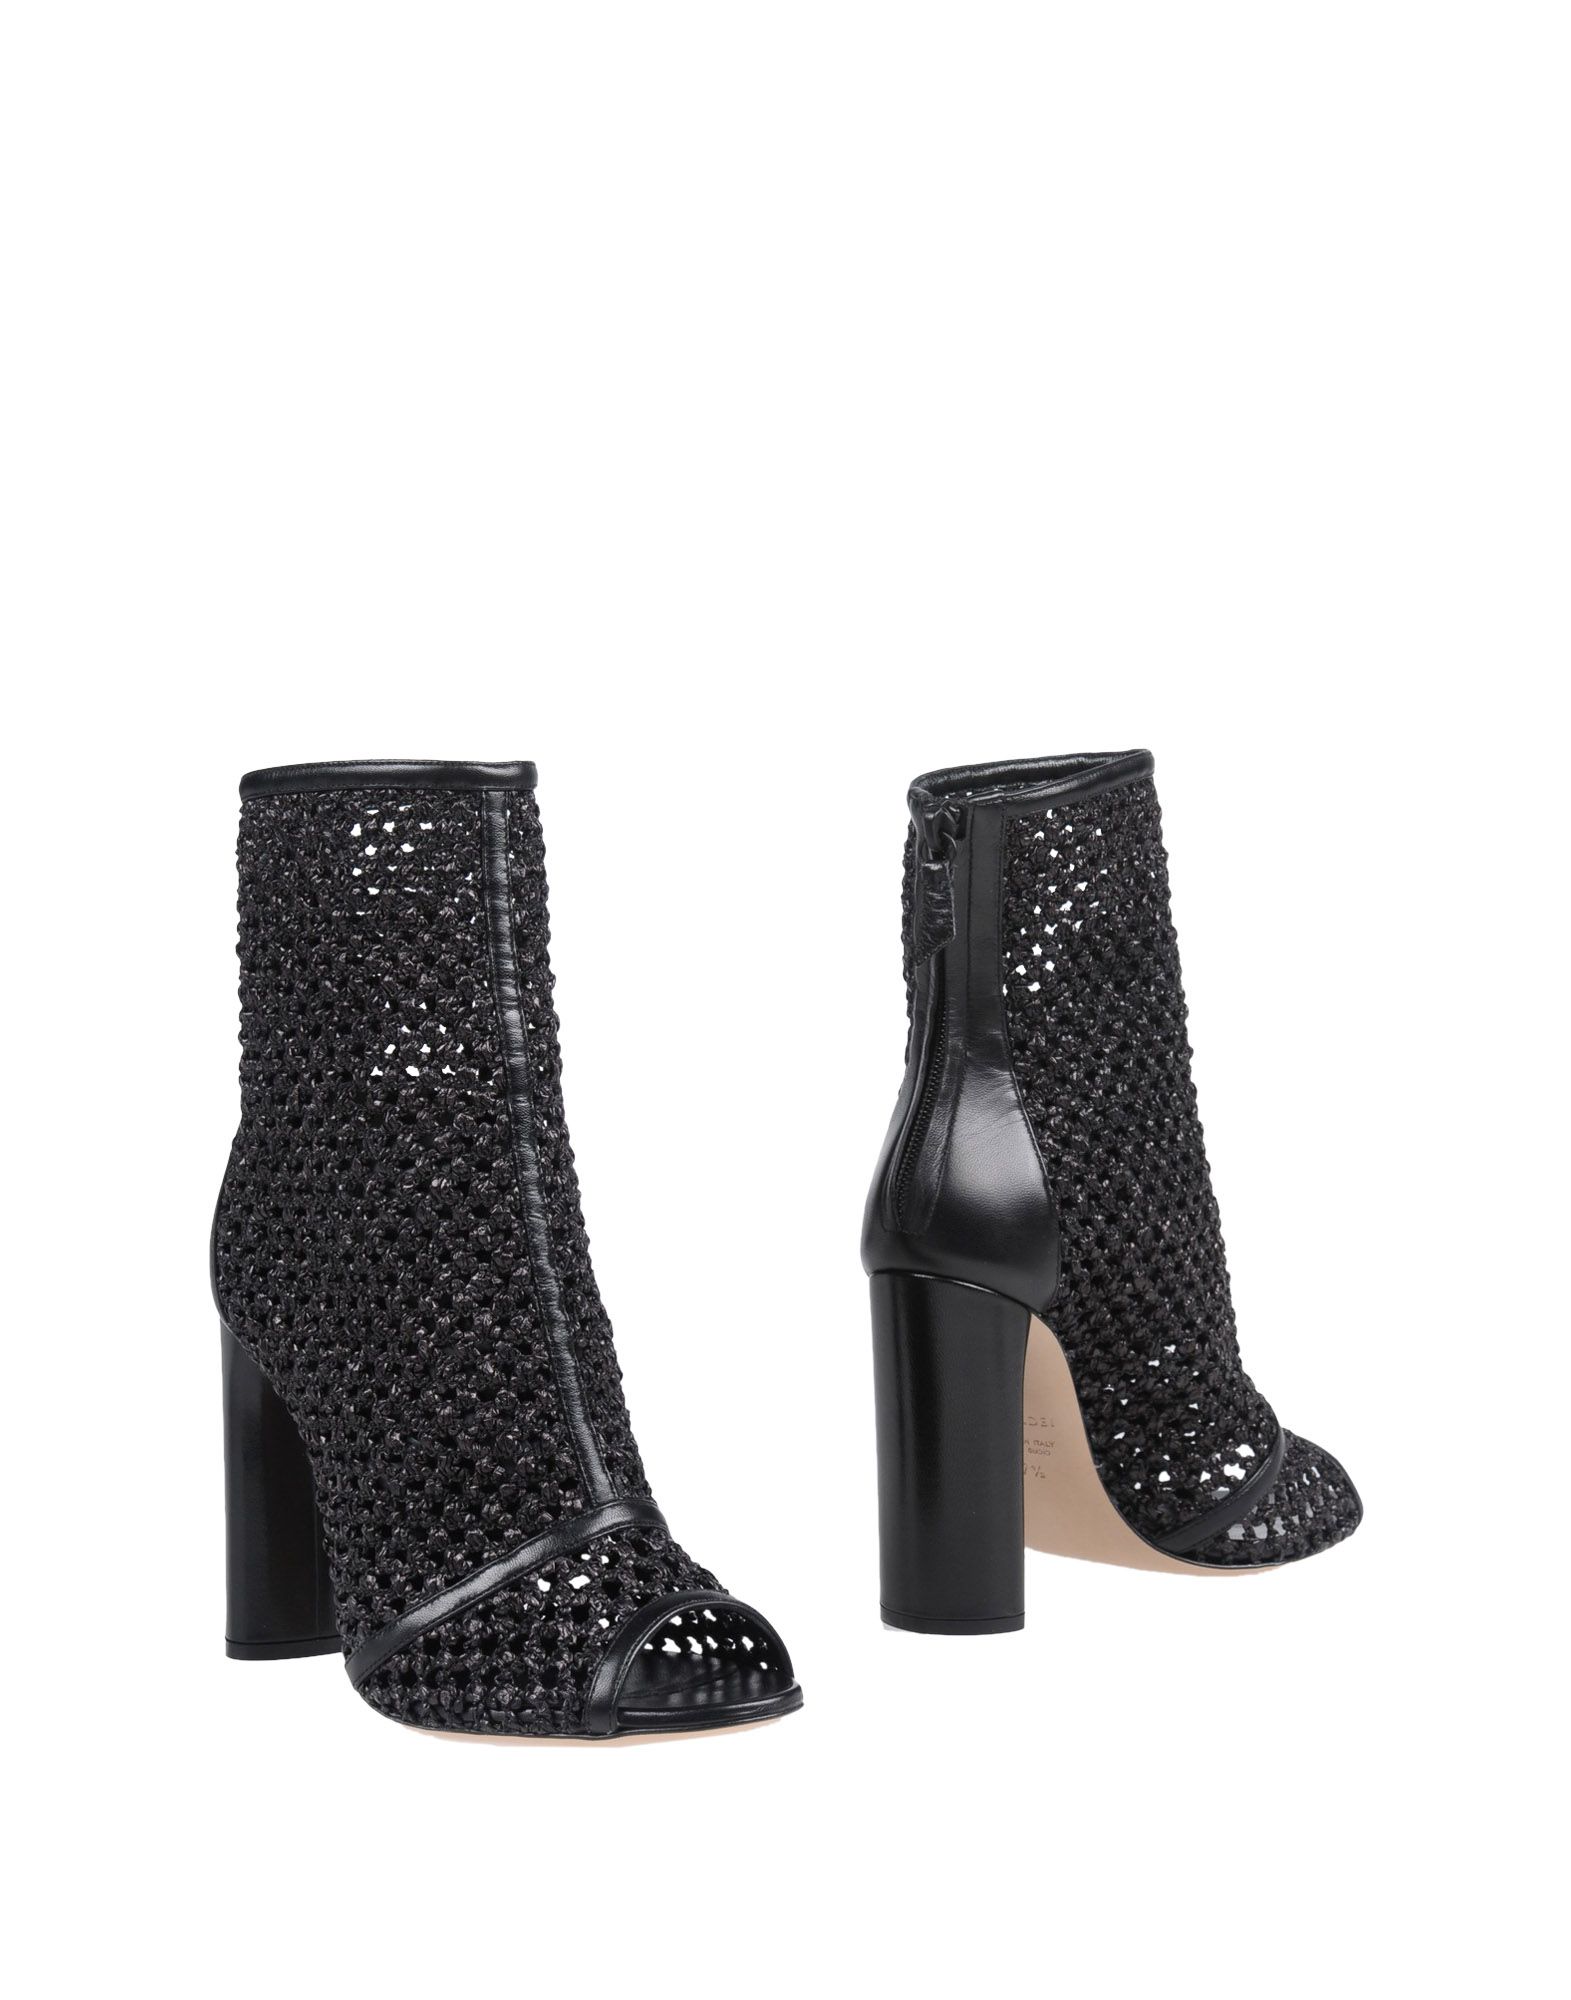 CASADEI Ankle boots - Item 11424768